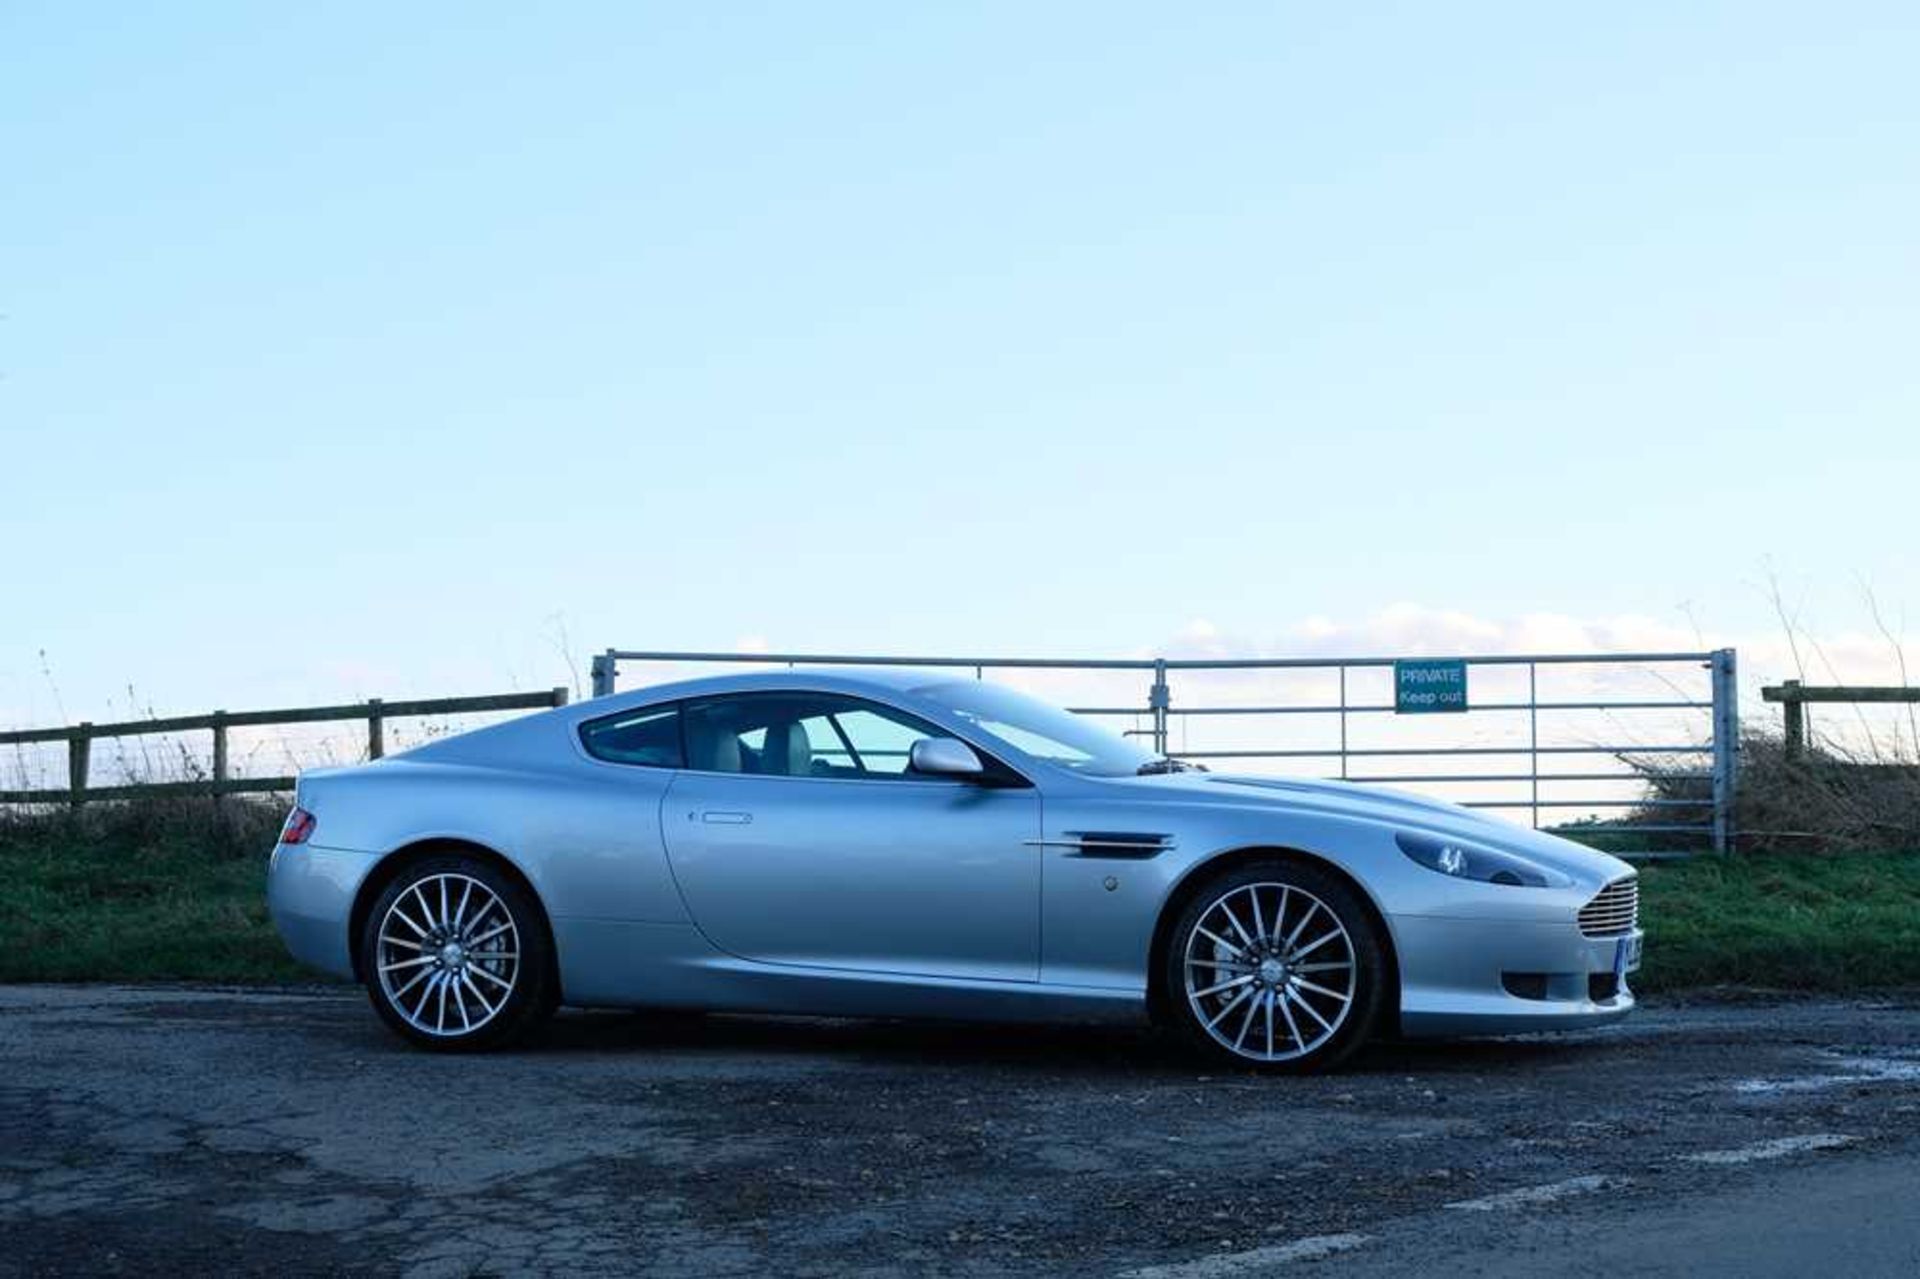 2005 Aston Martin DB9 c.25,000 from new and 4 former keepers - Image 6 of 59